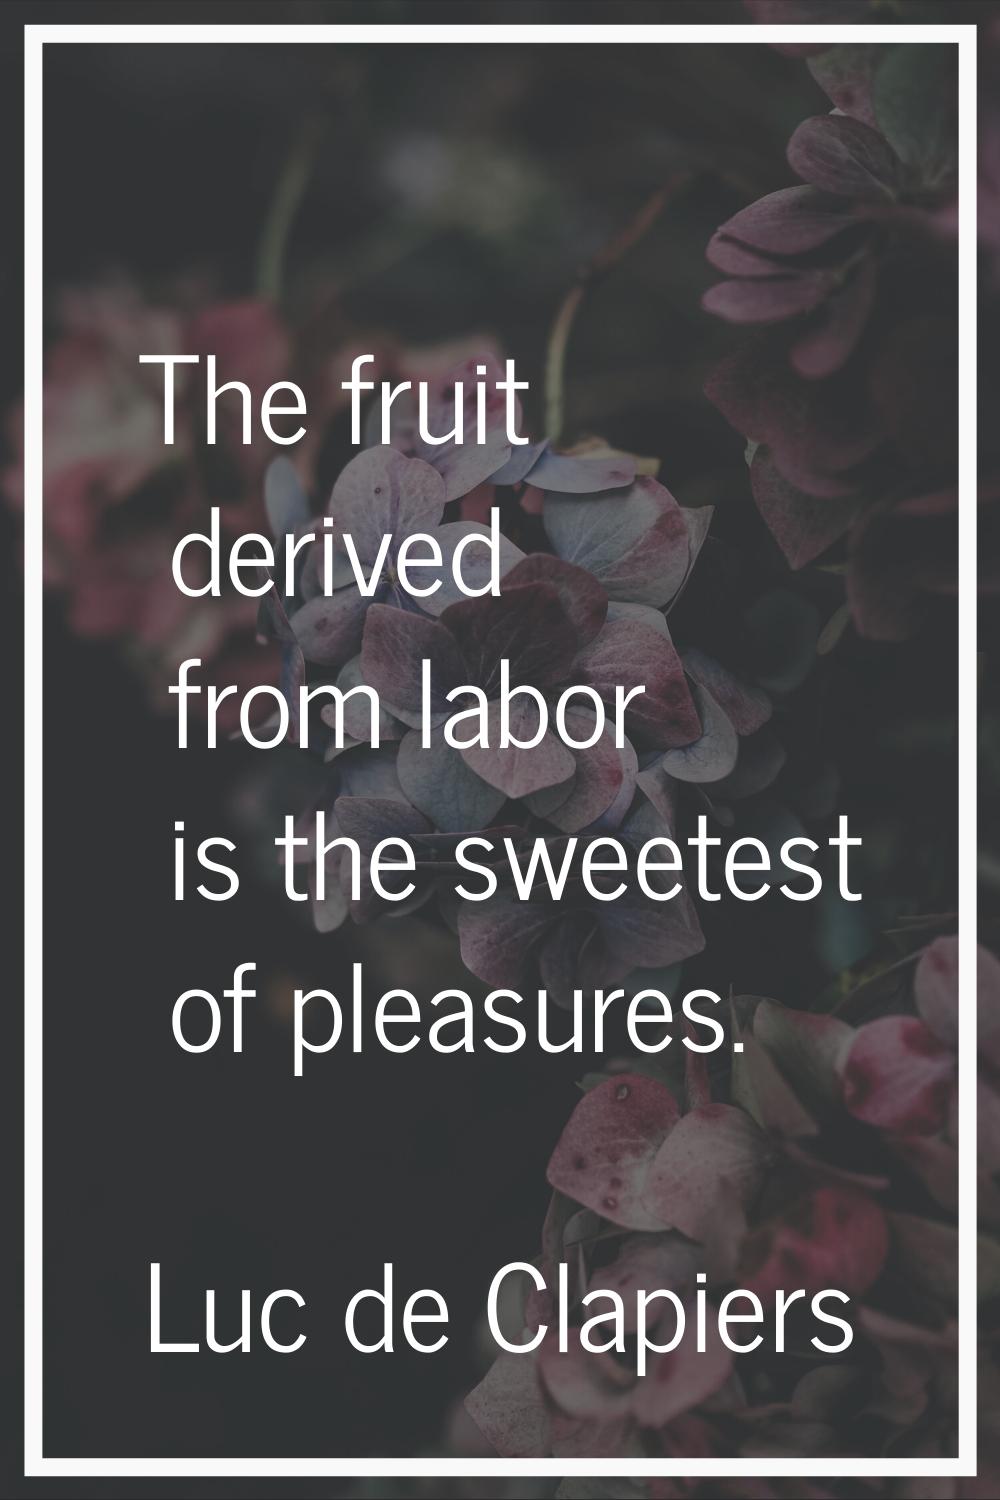 The fruit derived from labor is the sweetest of pleasures.